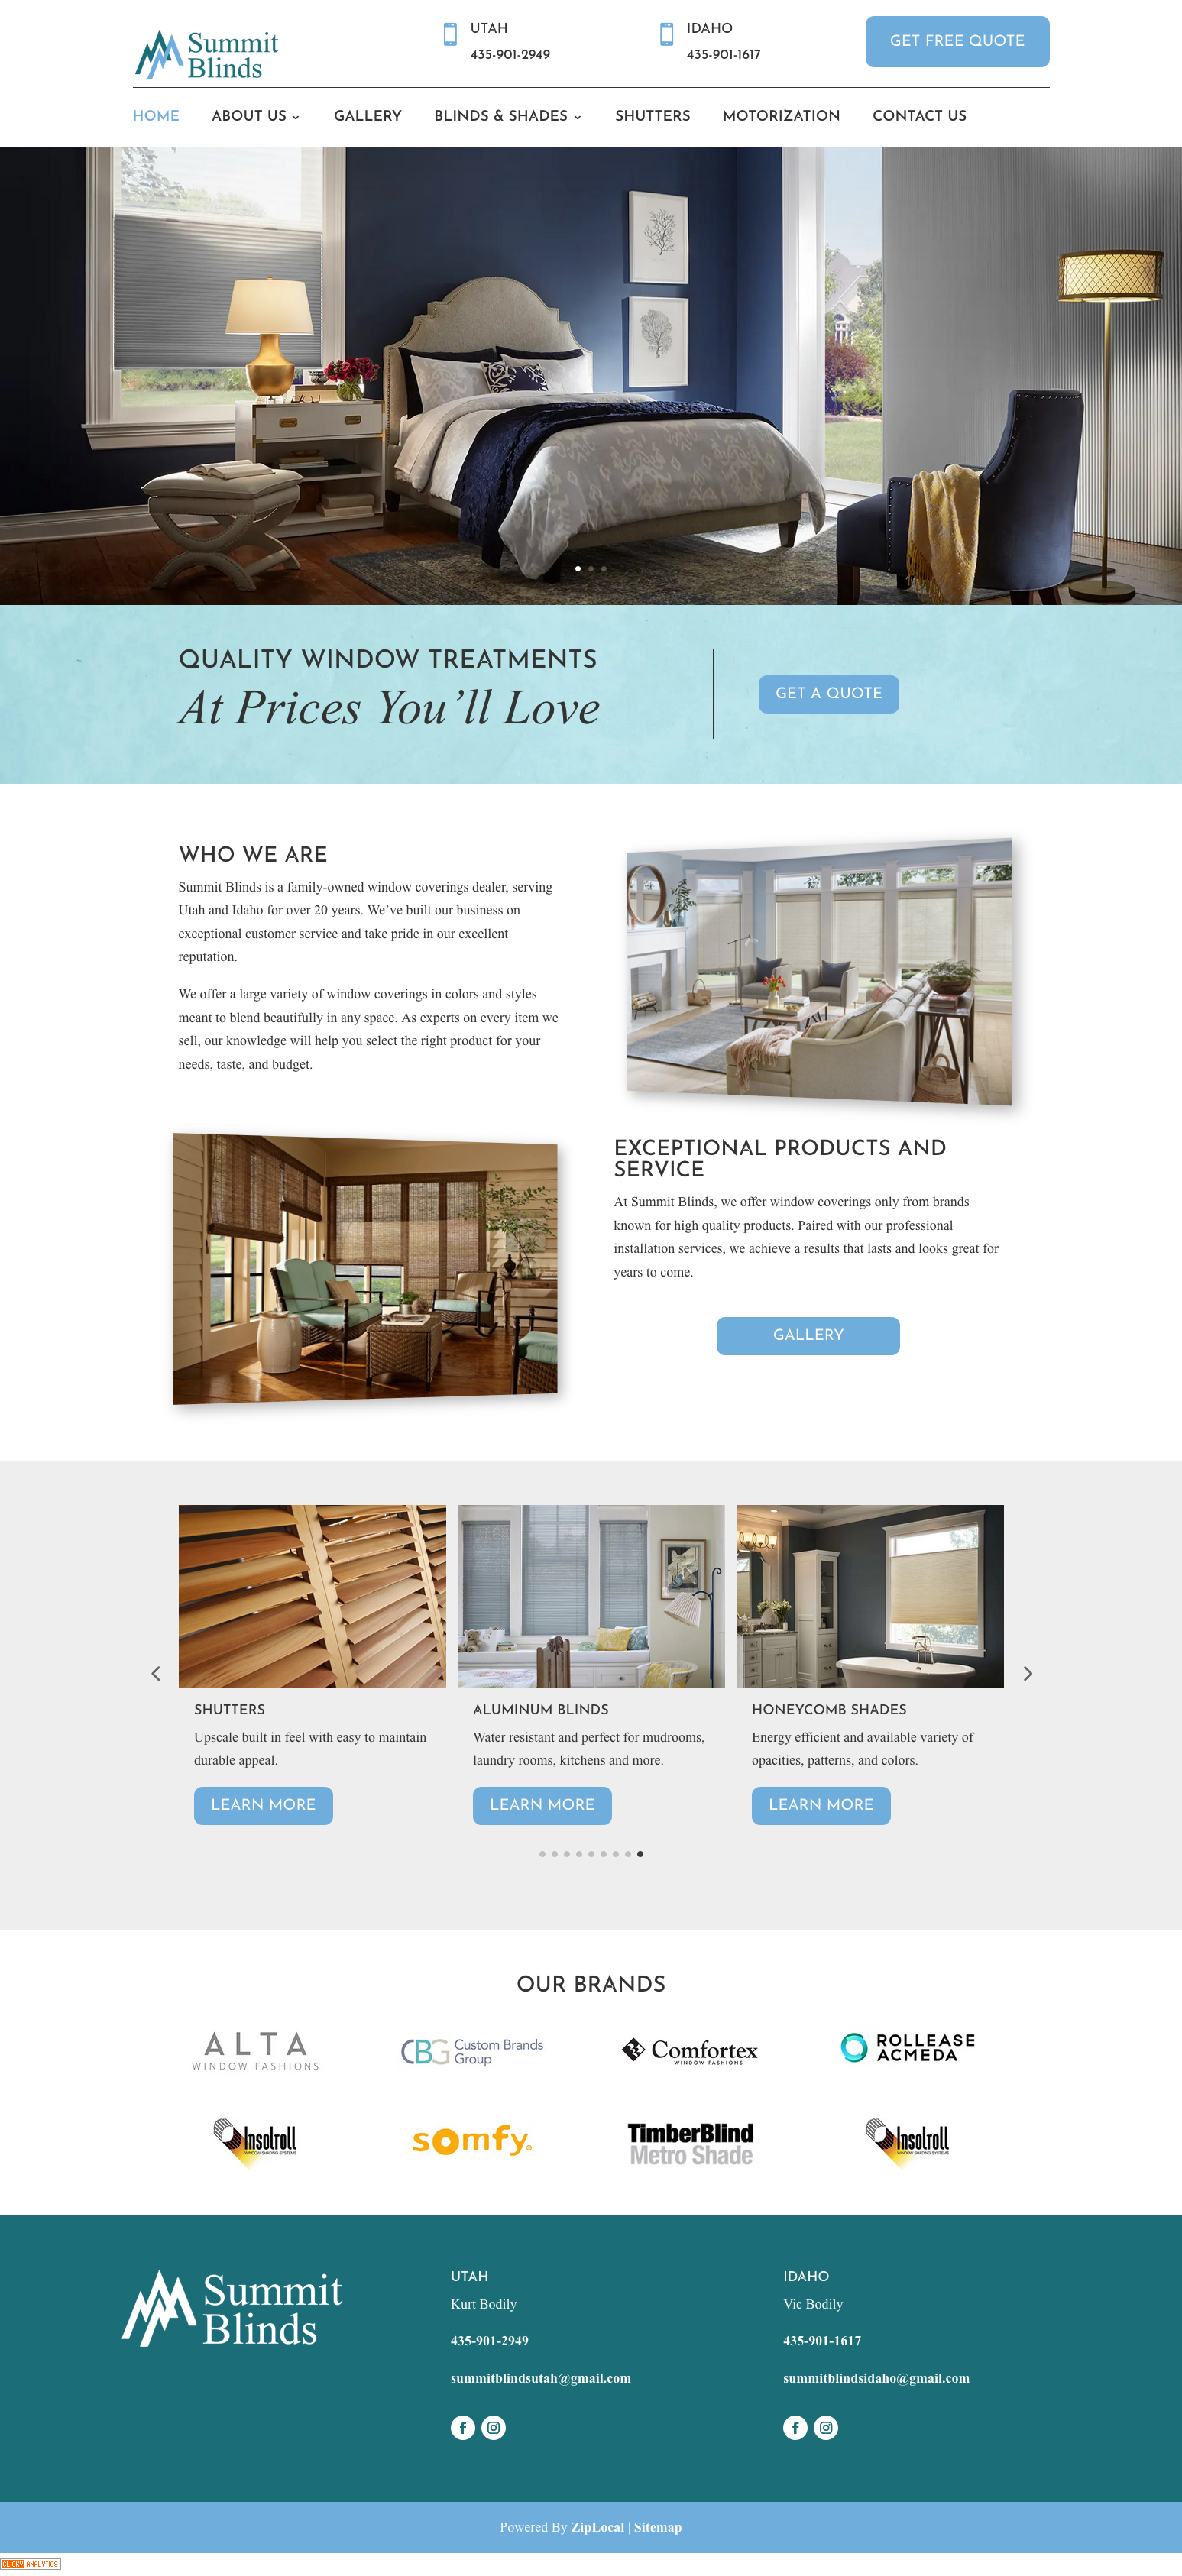 Website Example - Summit Blinds 